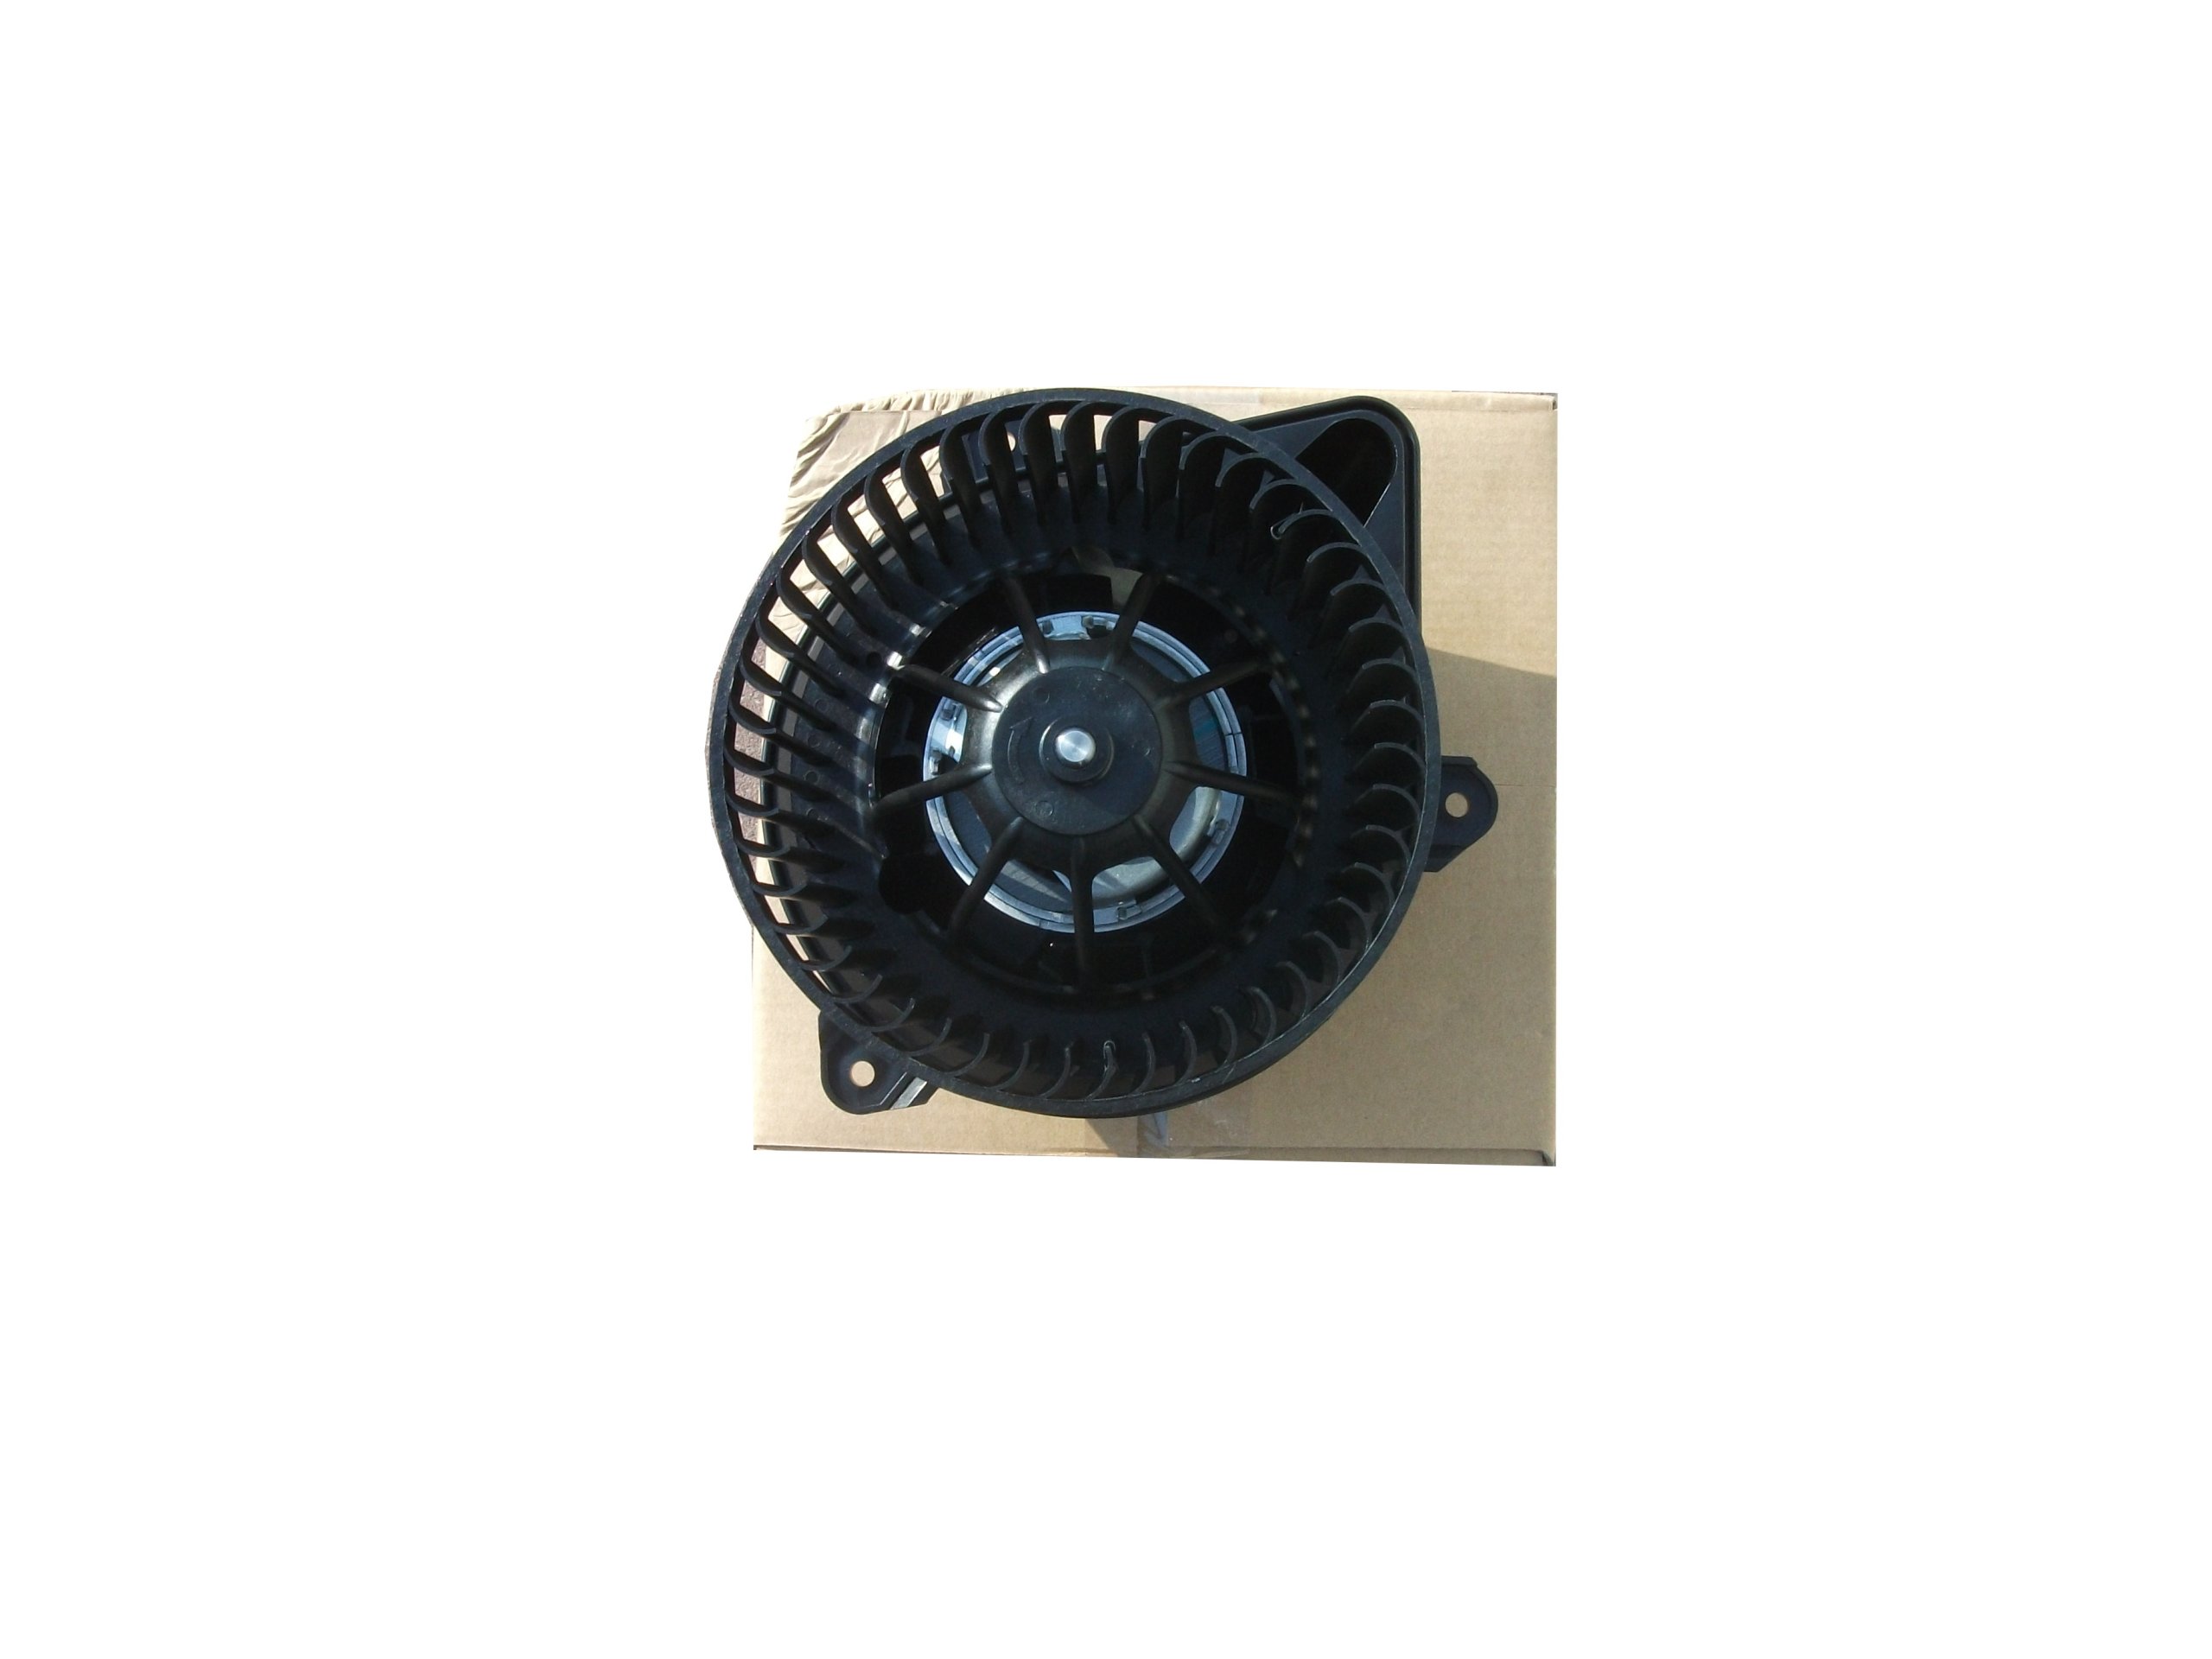 RENAULT MEGANE SCENIC AND INTERIOR FAN 96-03